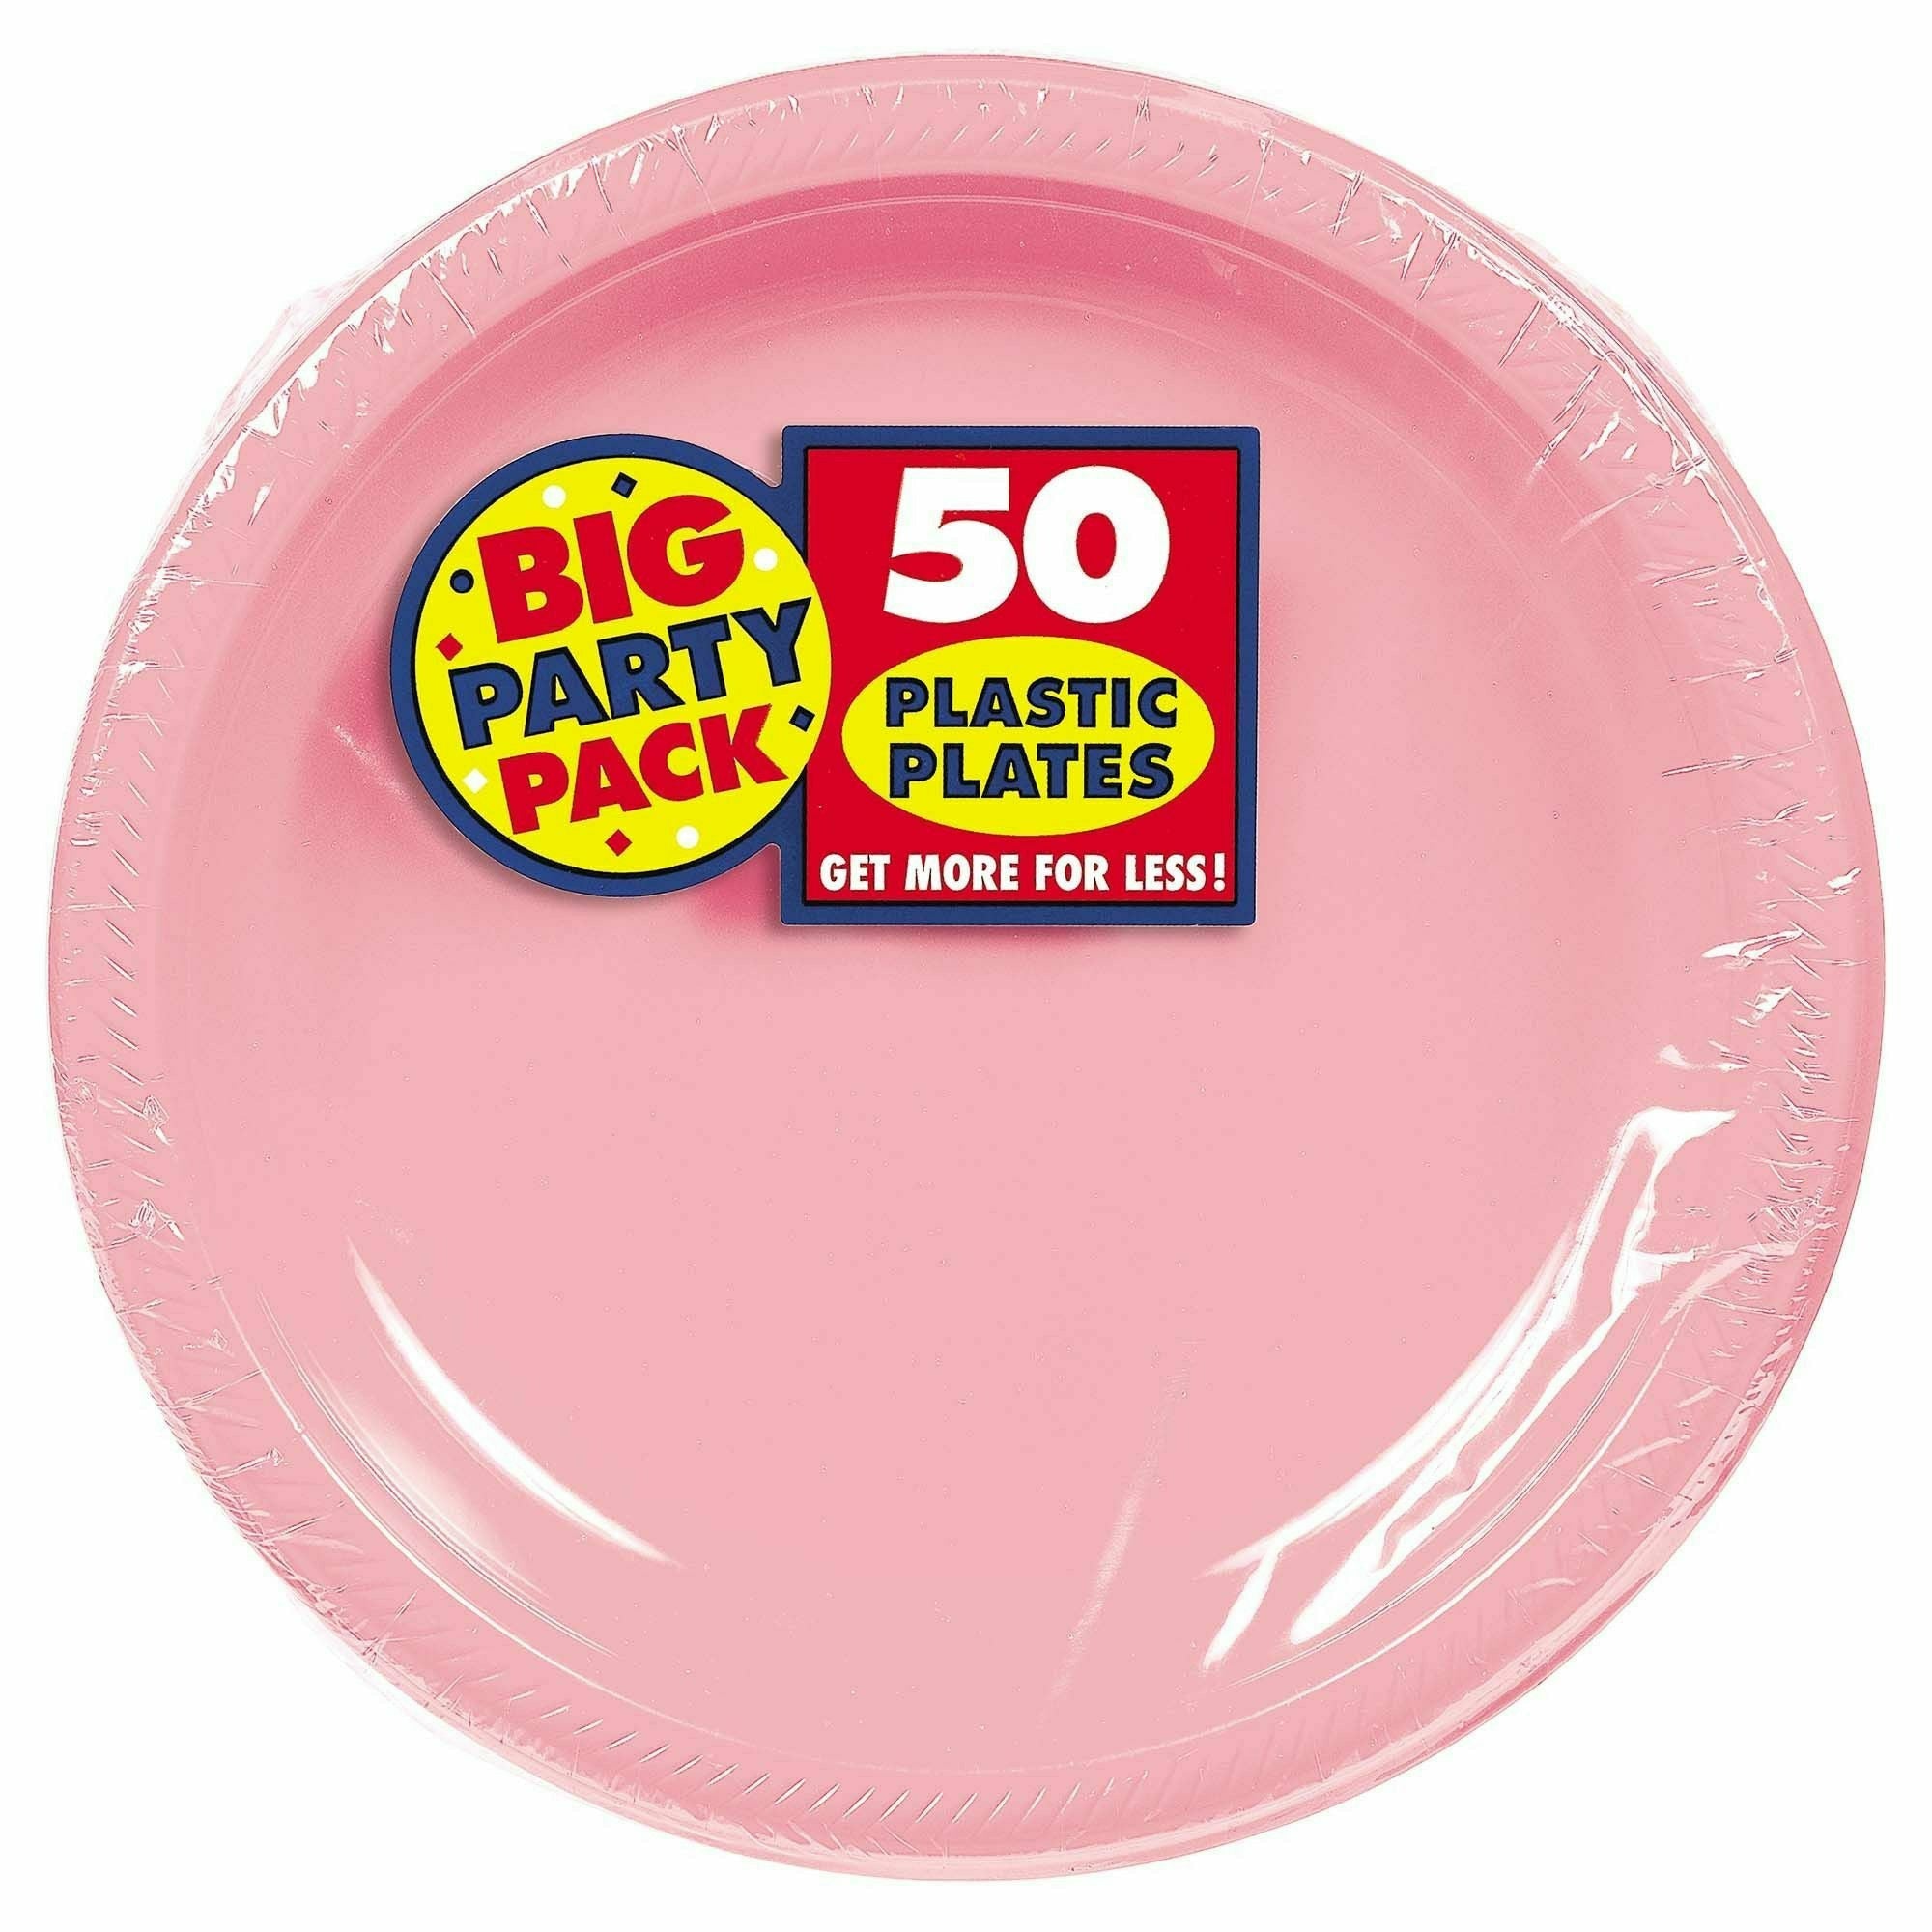 Amscan BASIC Big Party Pack New Pink Plastic Dinner Plates 50ct